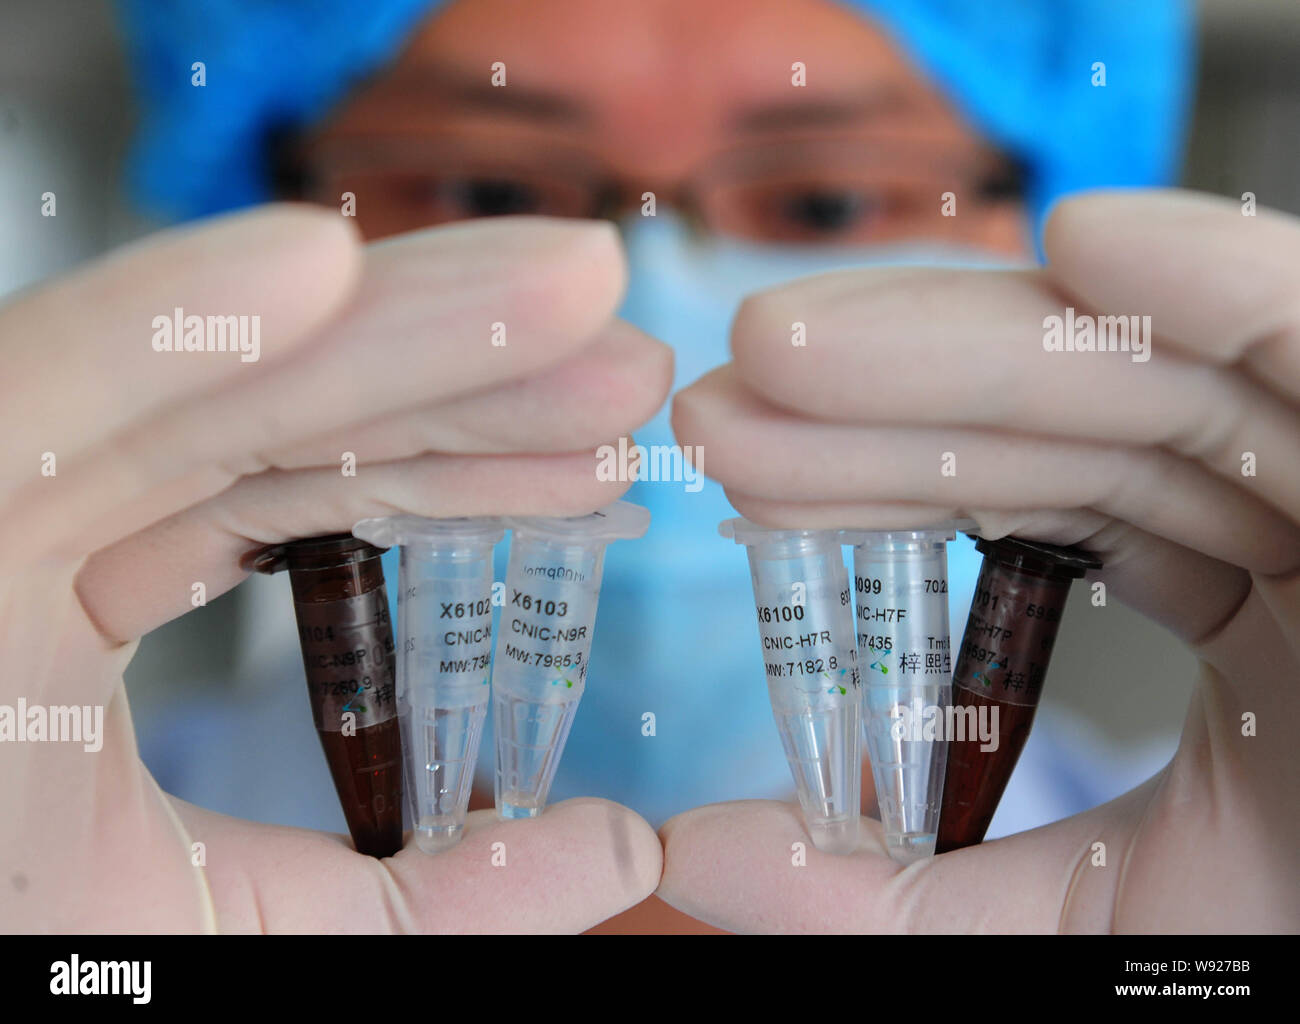 A Chinese worker shows testing reagents for the H7N9 avian flu virus in the lab of the Hunan provincial center for disease control and prevention in C Stock Photo